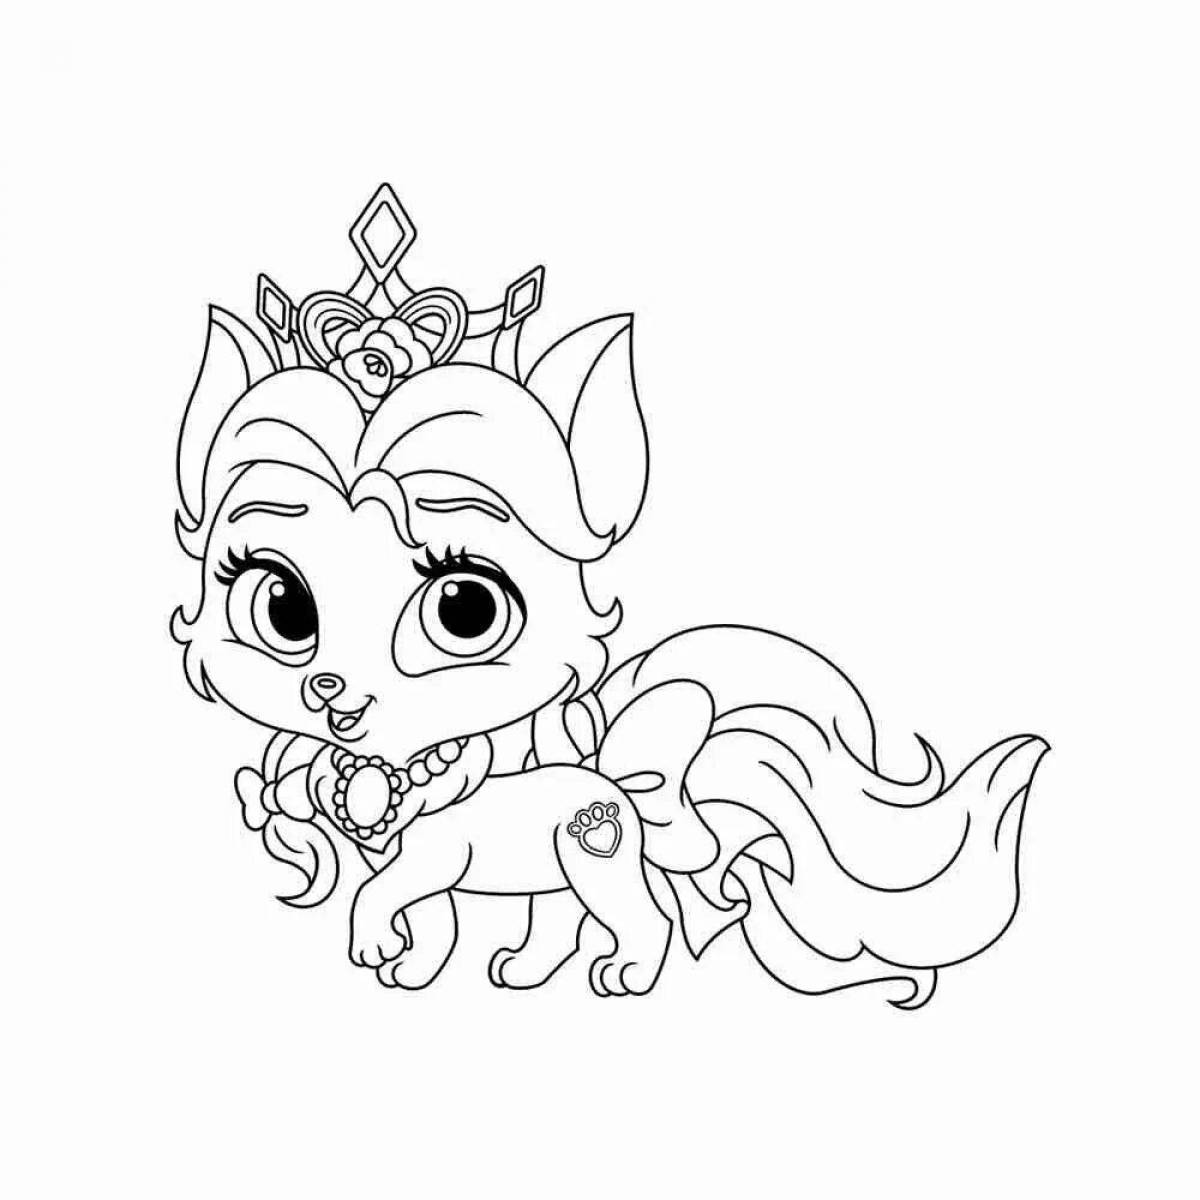 Coloring page gorgeous cat with a crown